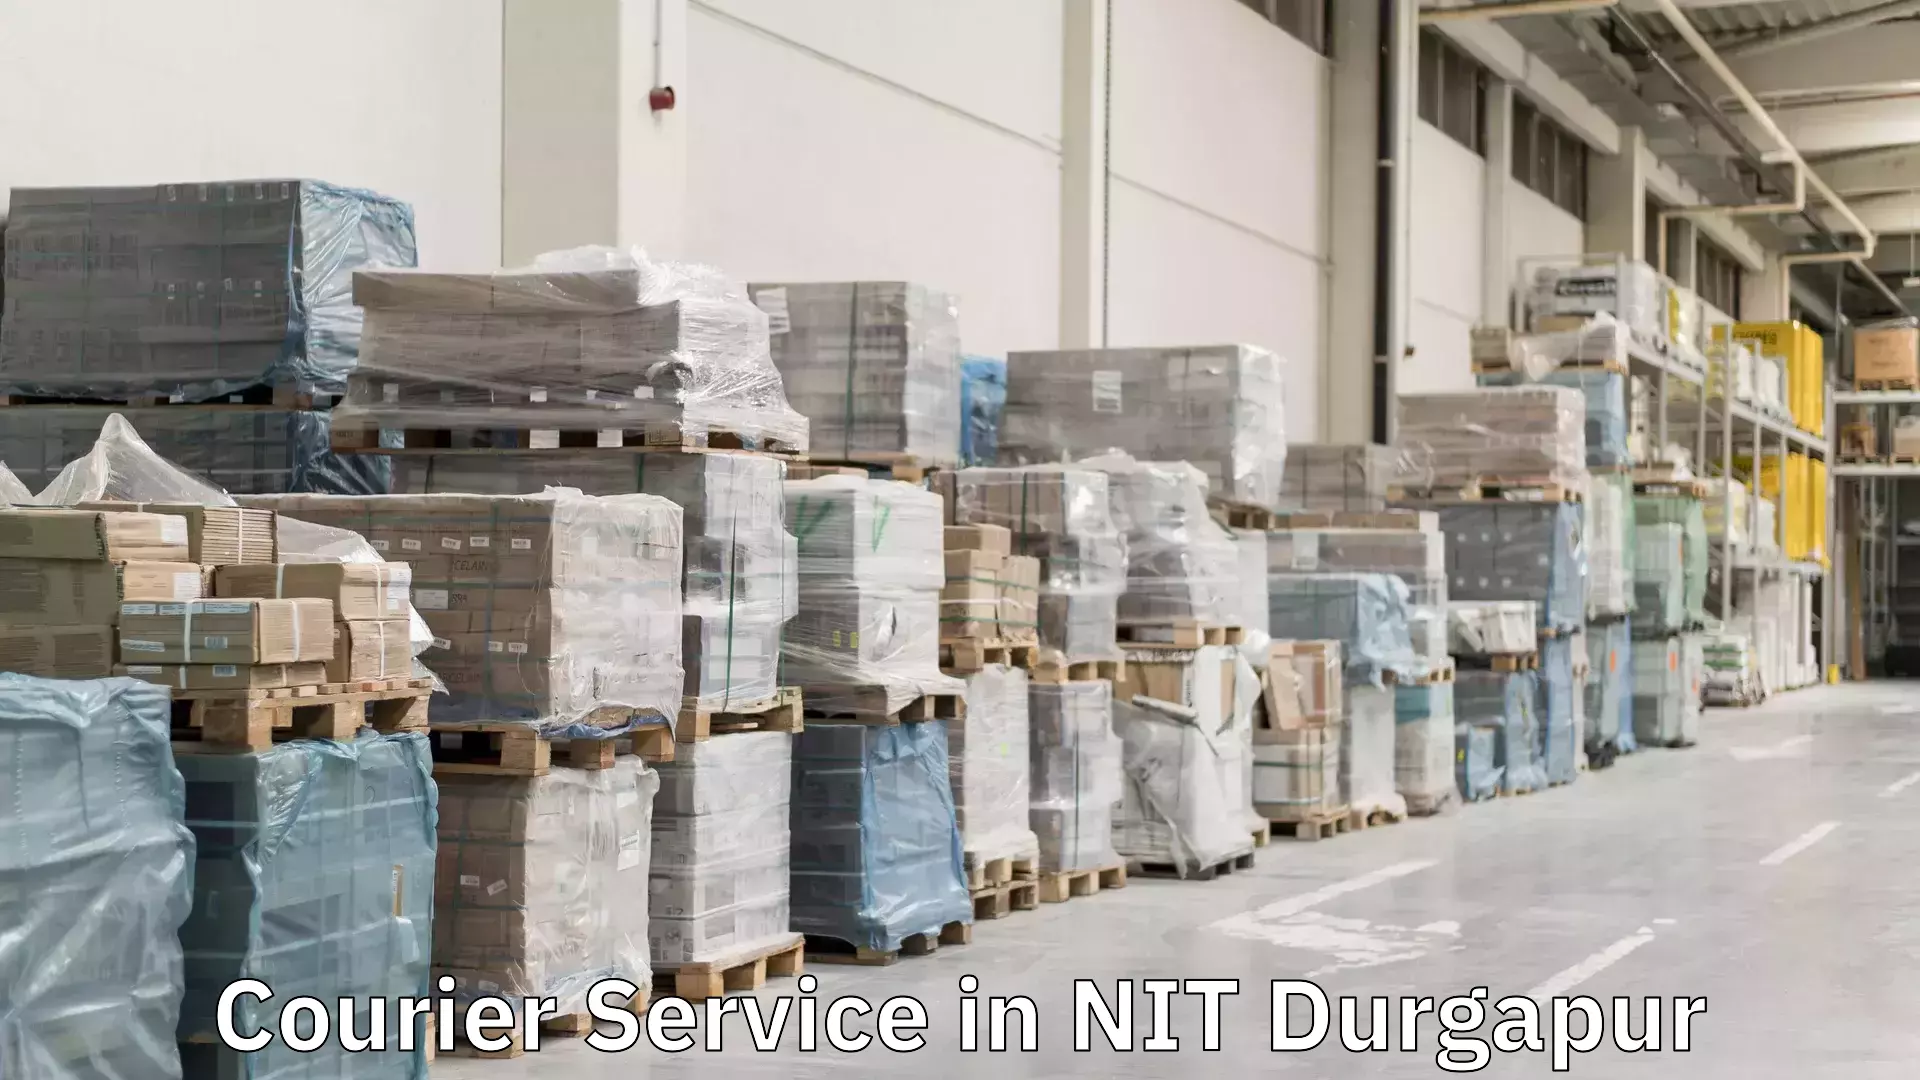 Flexible shipping options in NIT Durgapur